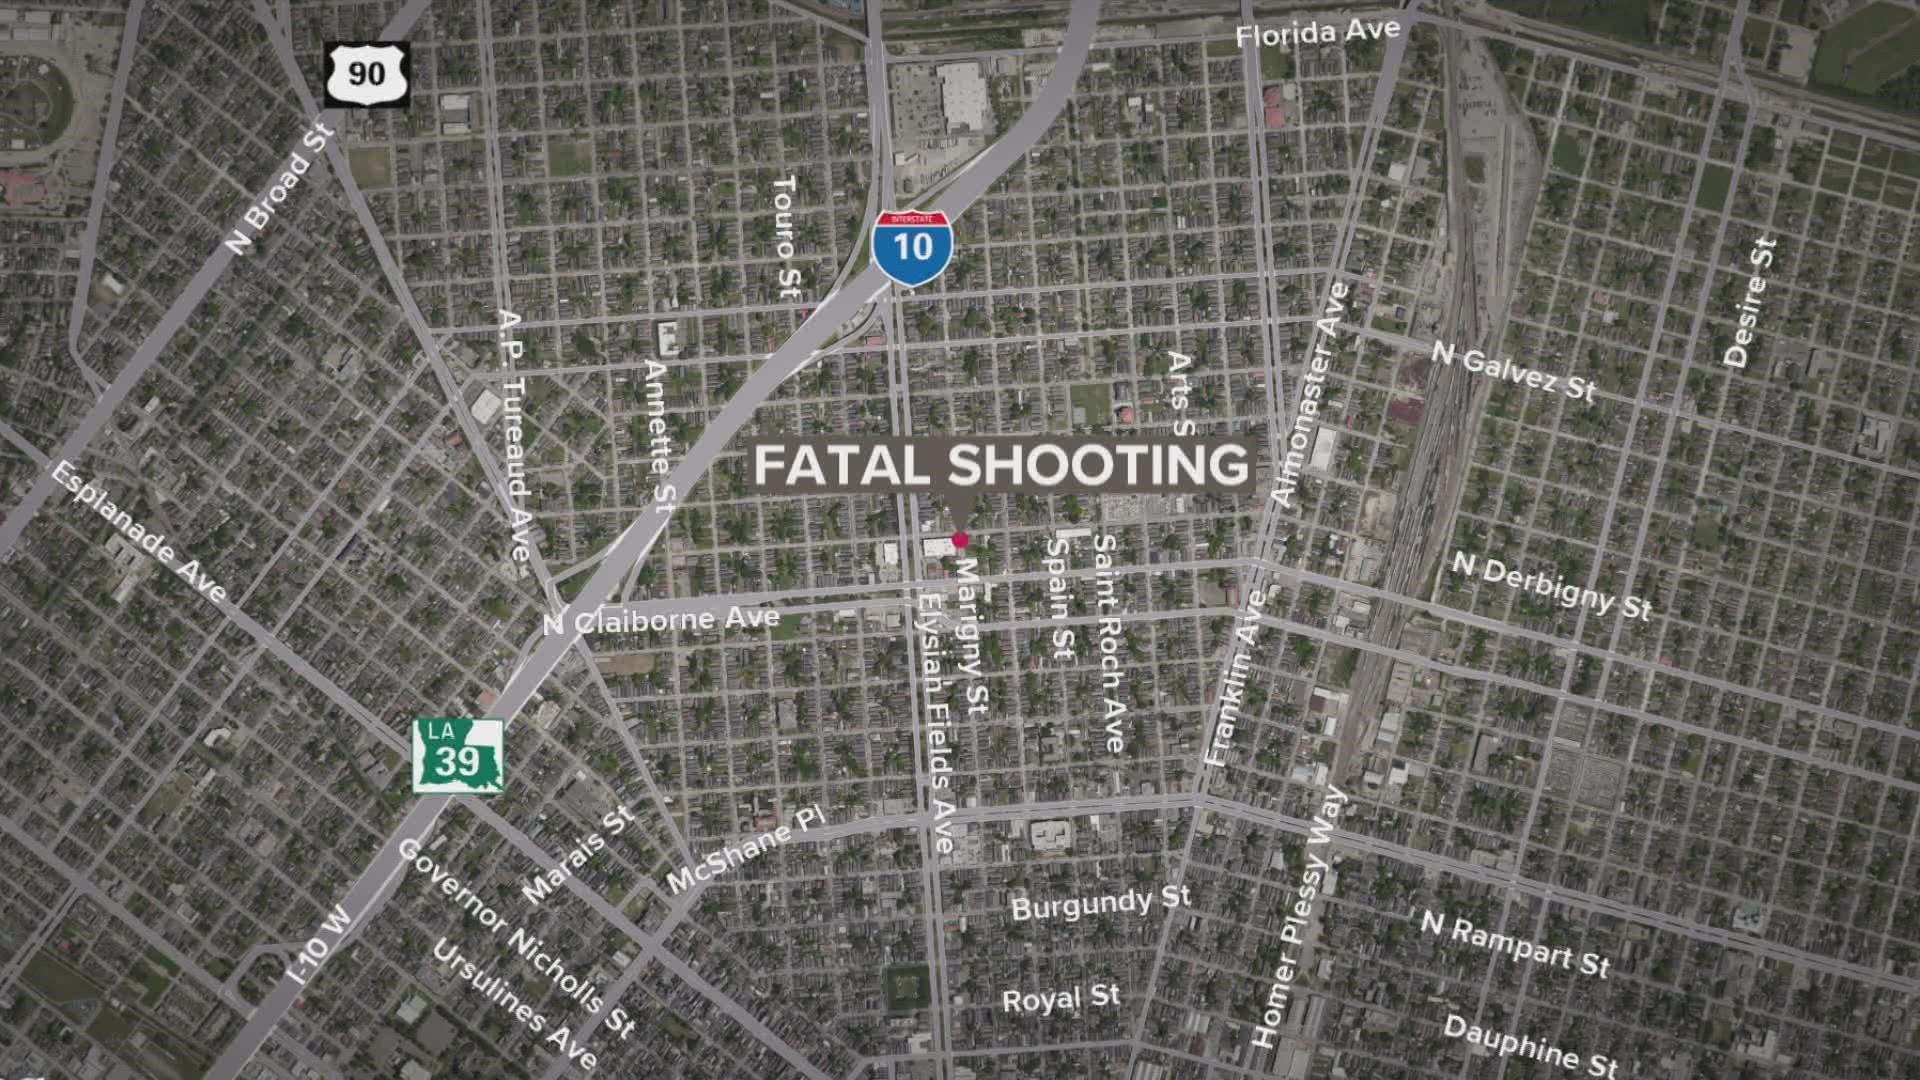 The shooting occurred just after 1:30 a.m. Saturday.